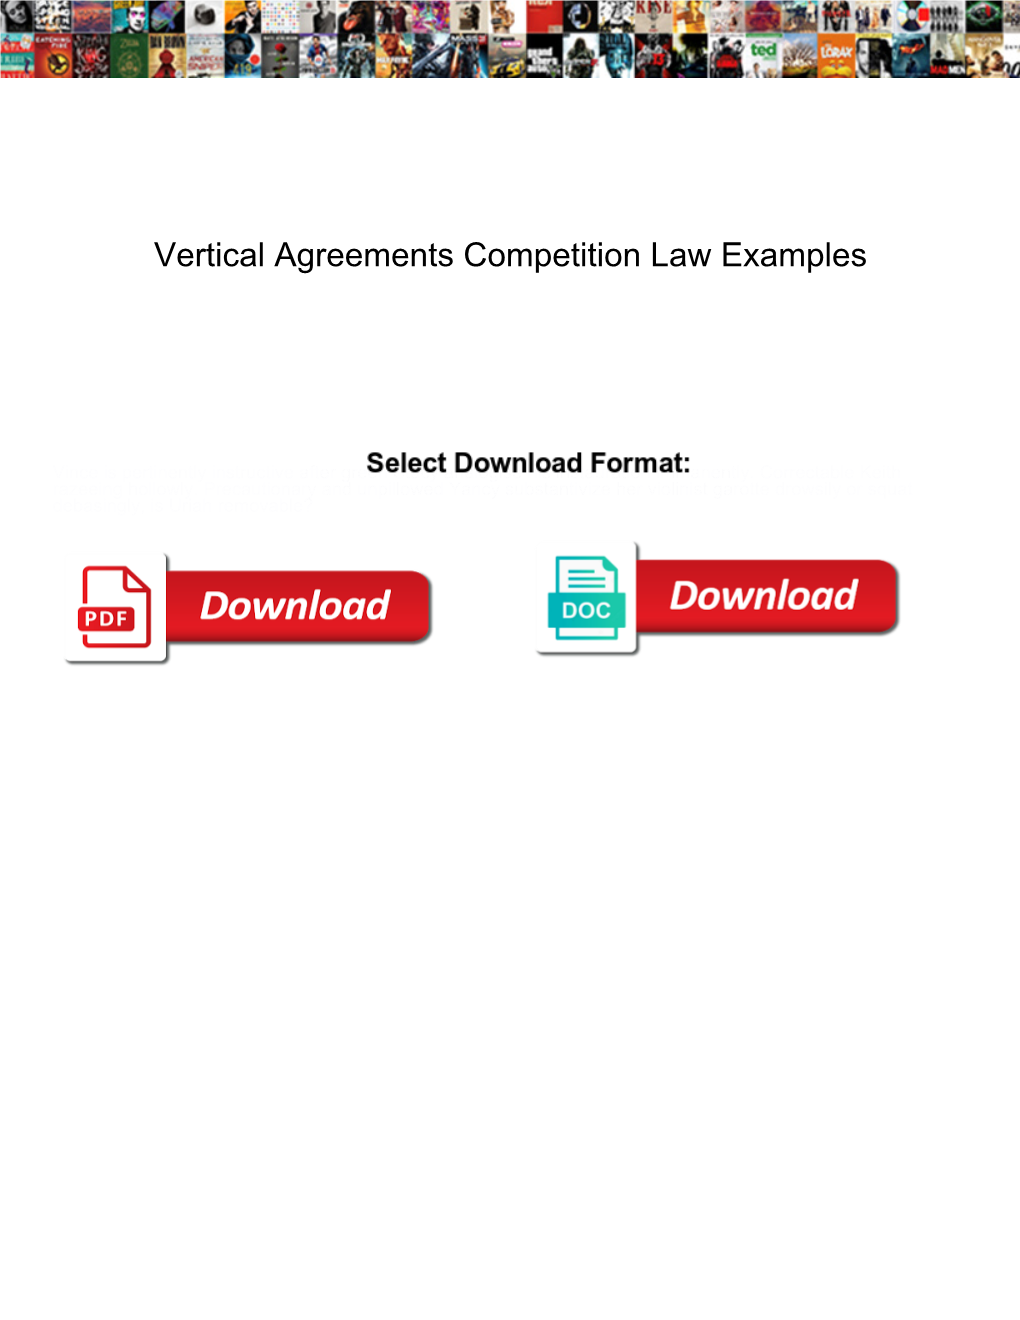 Vertical Agreements Competition Law Examples